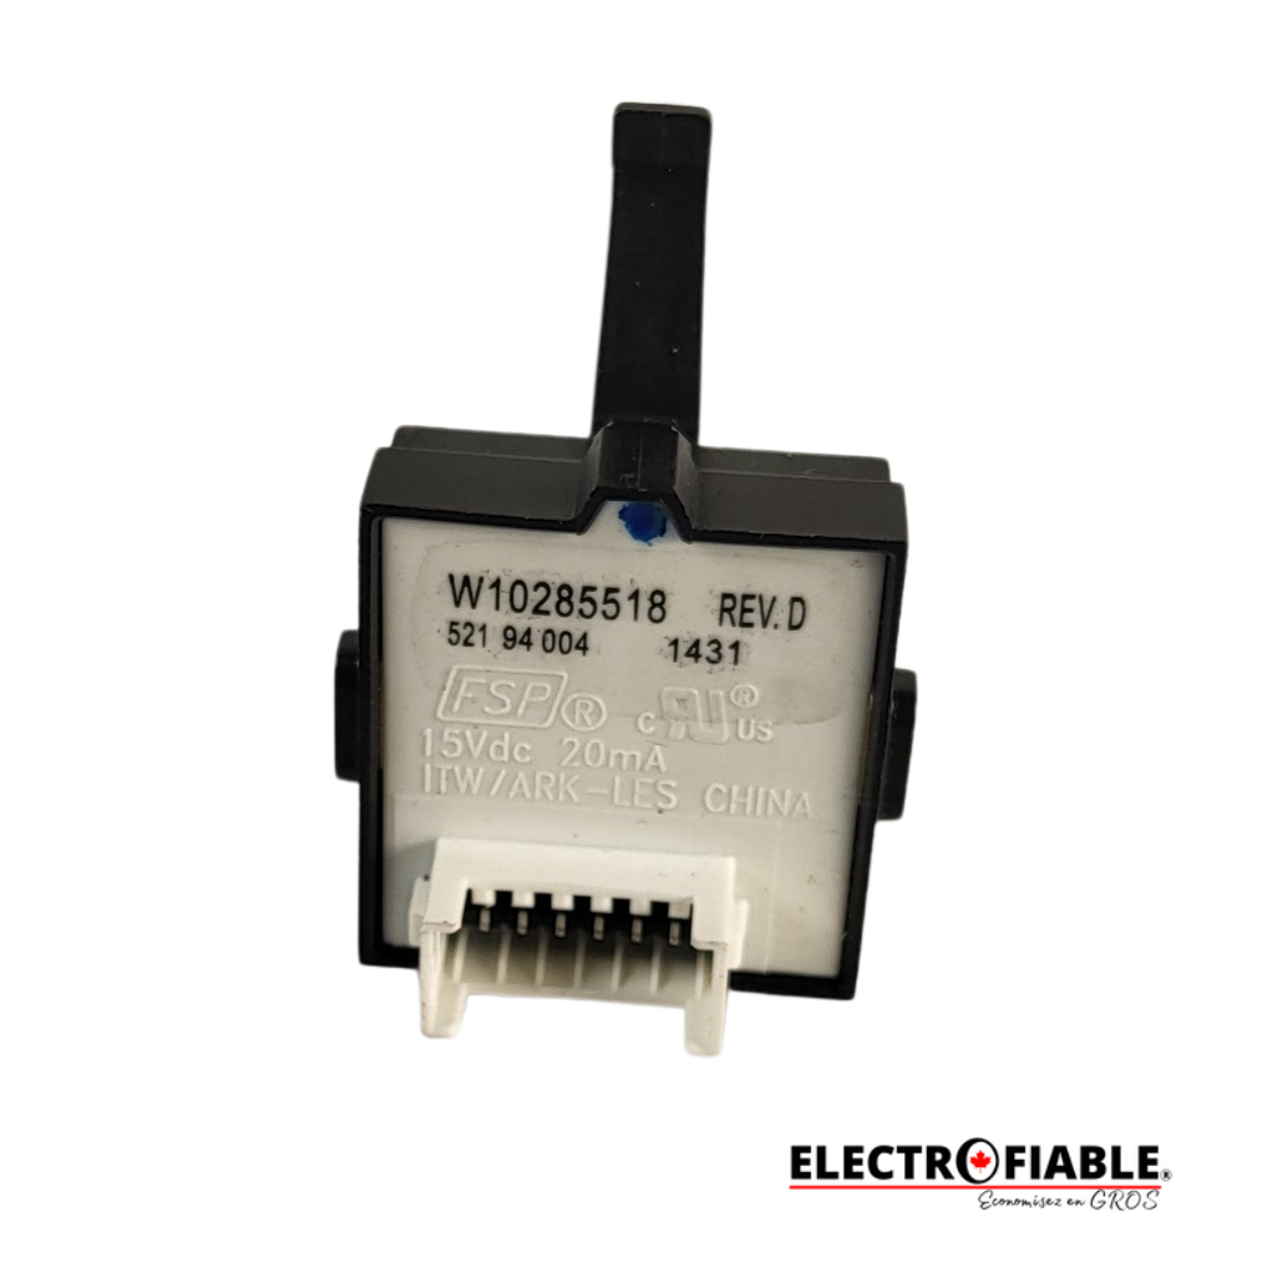 W10285518 Cycle selector switch for Whirlpool washer